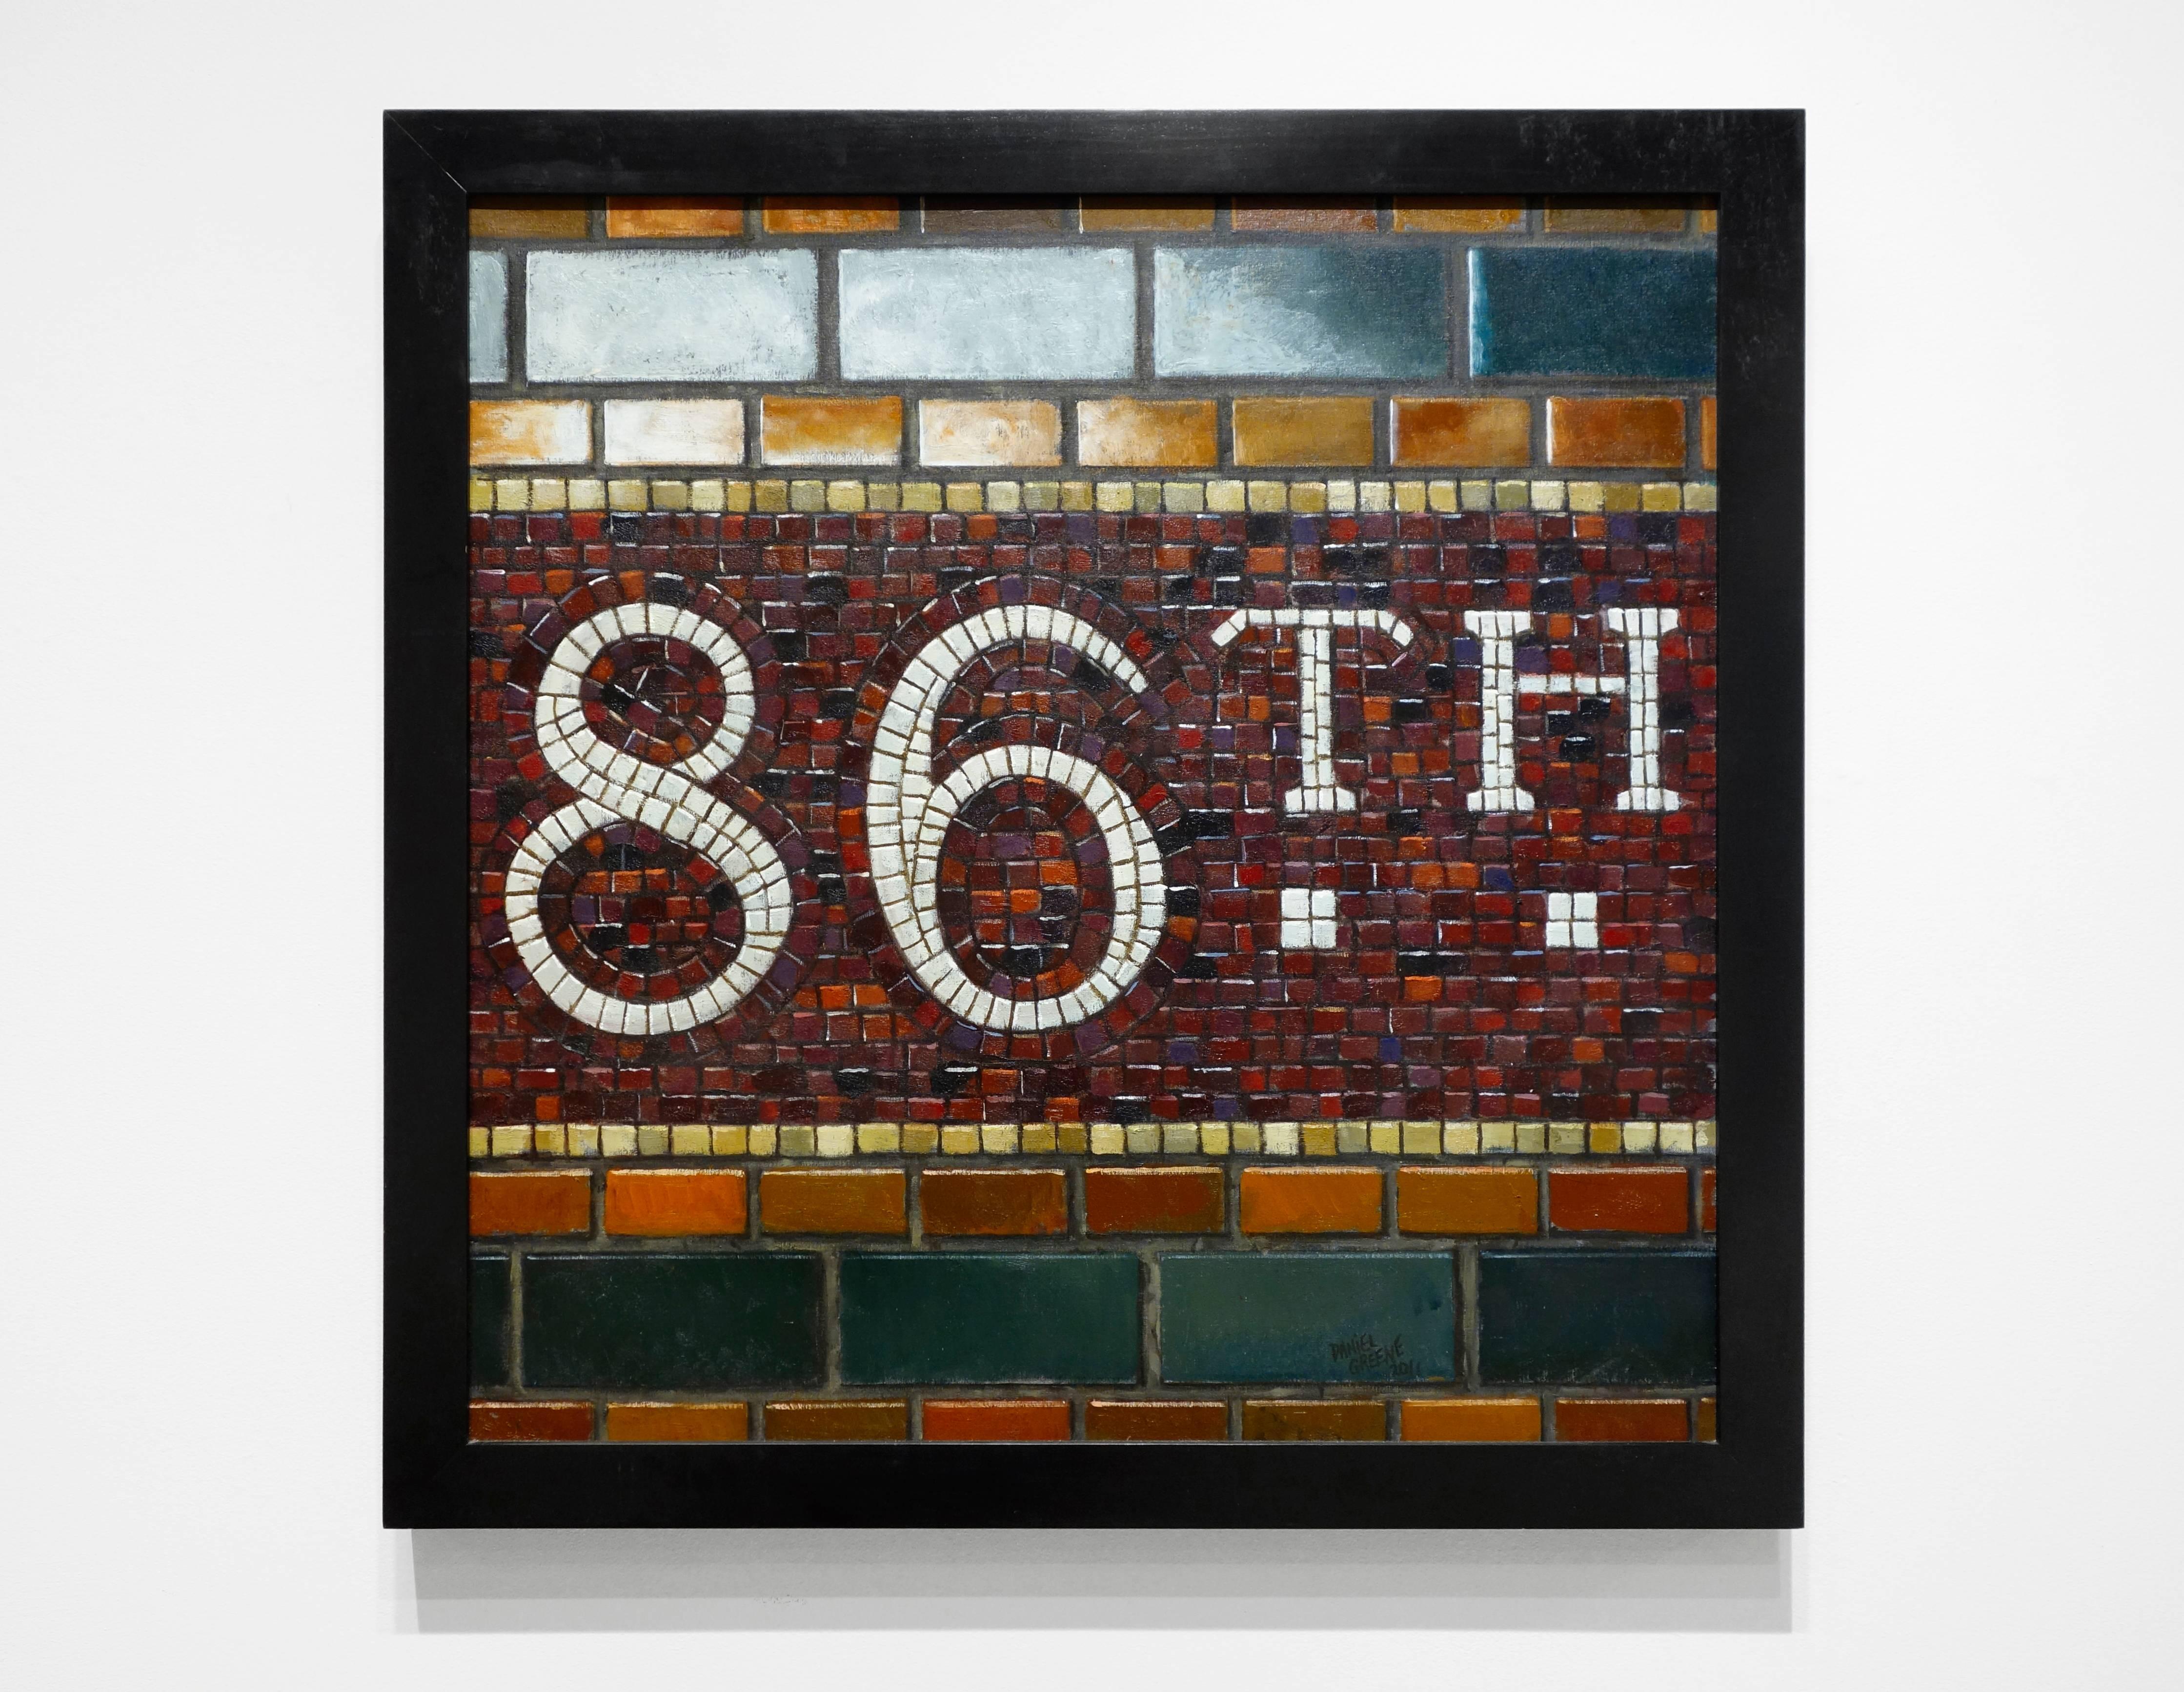 86TH ST.- MOSAIC, subway sign, brown tile, white lettering, nyc, train station - Painting by Daniel Greene